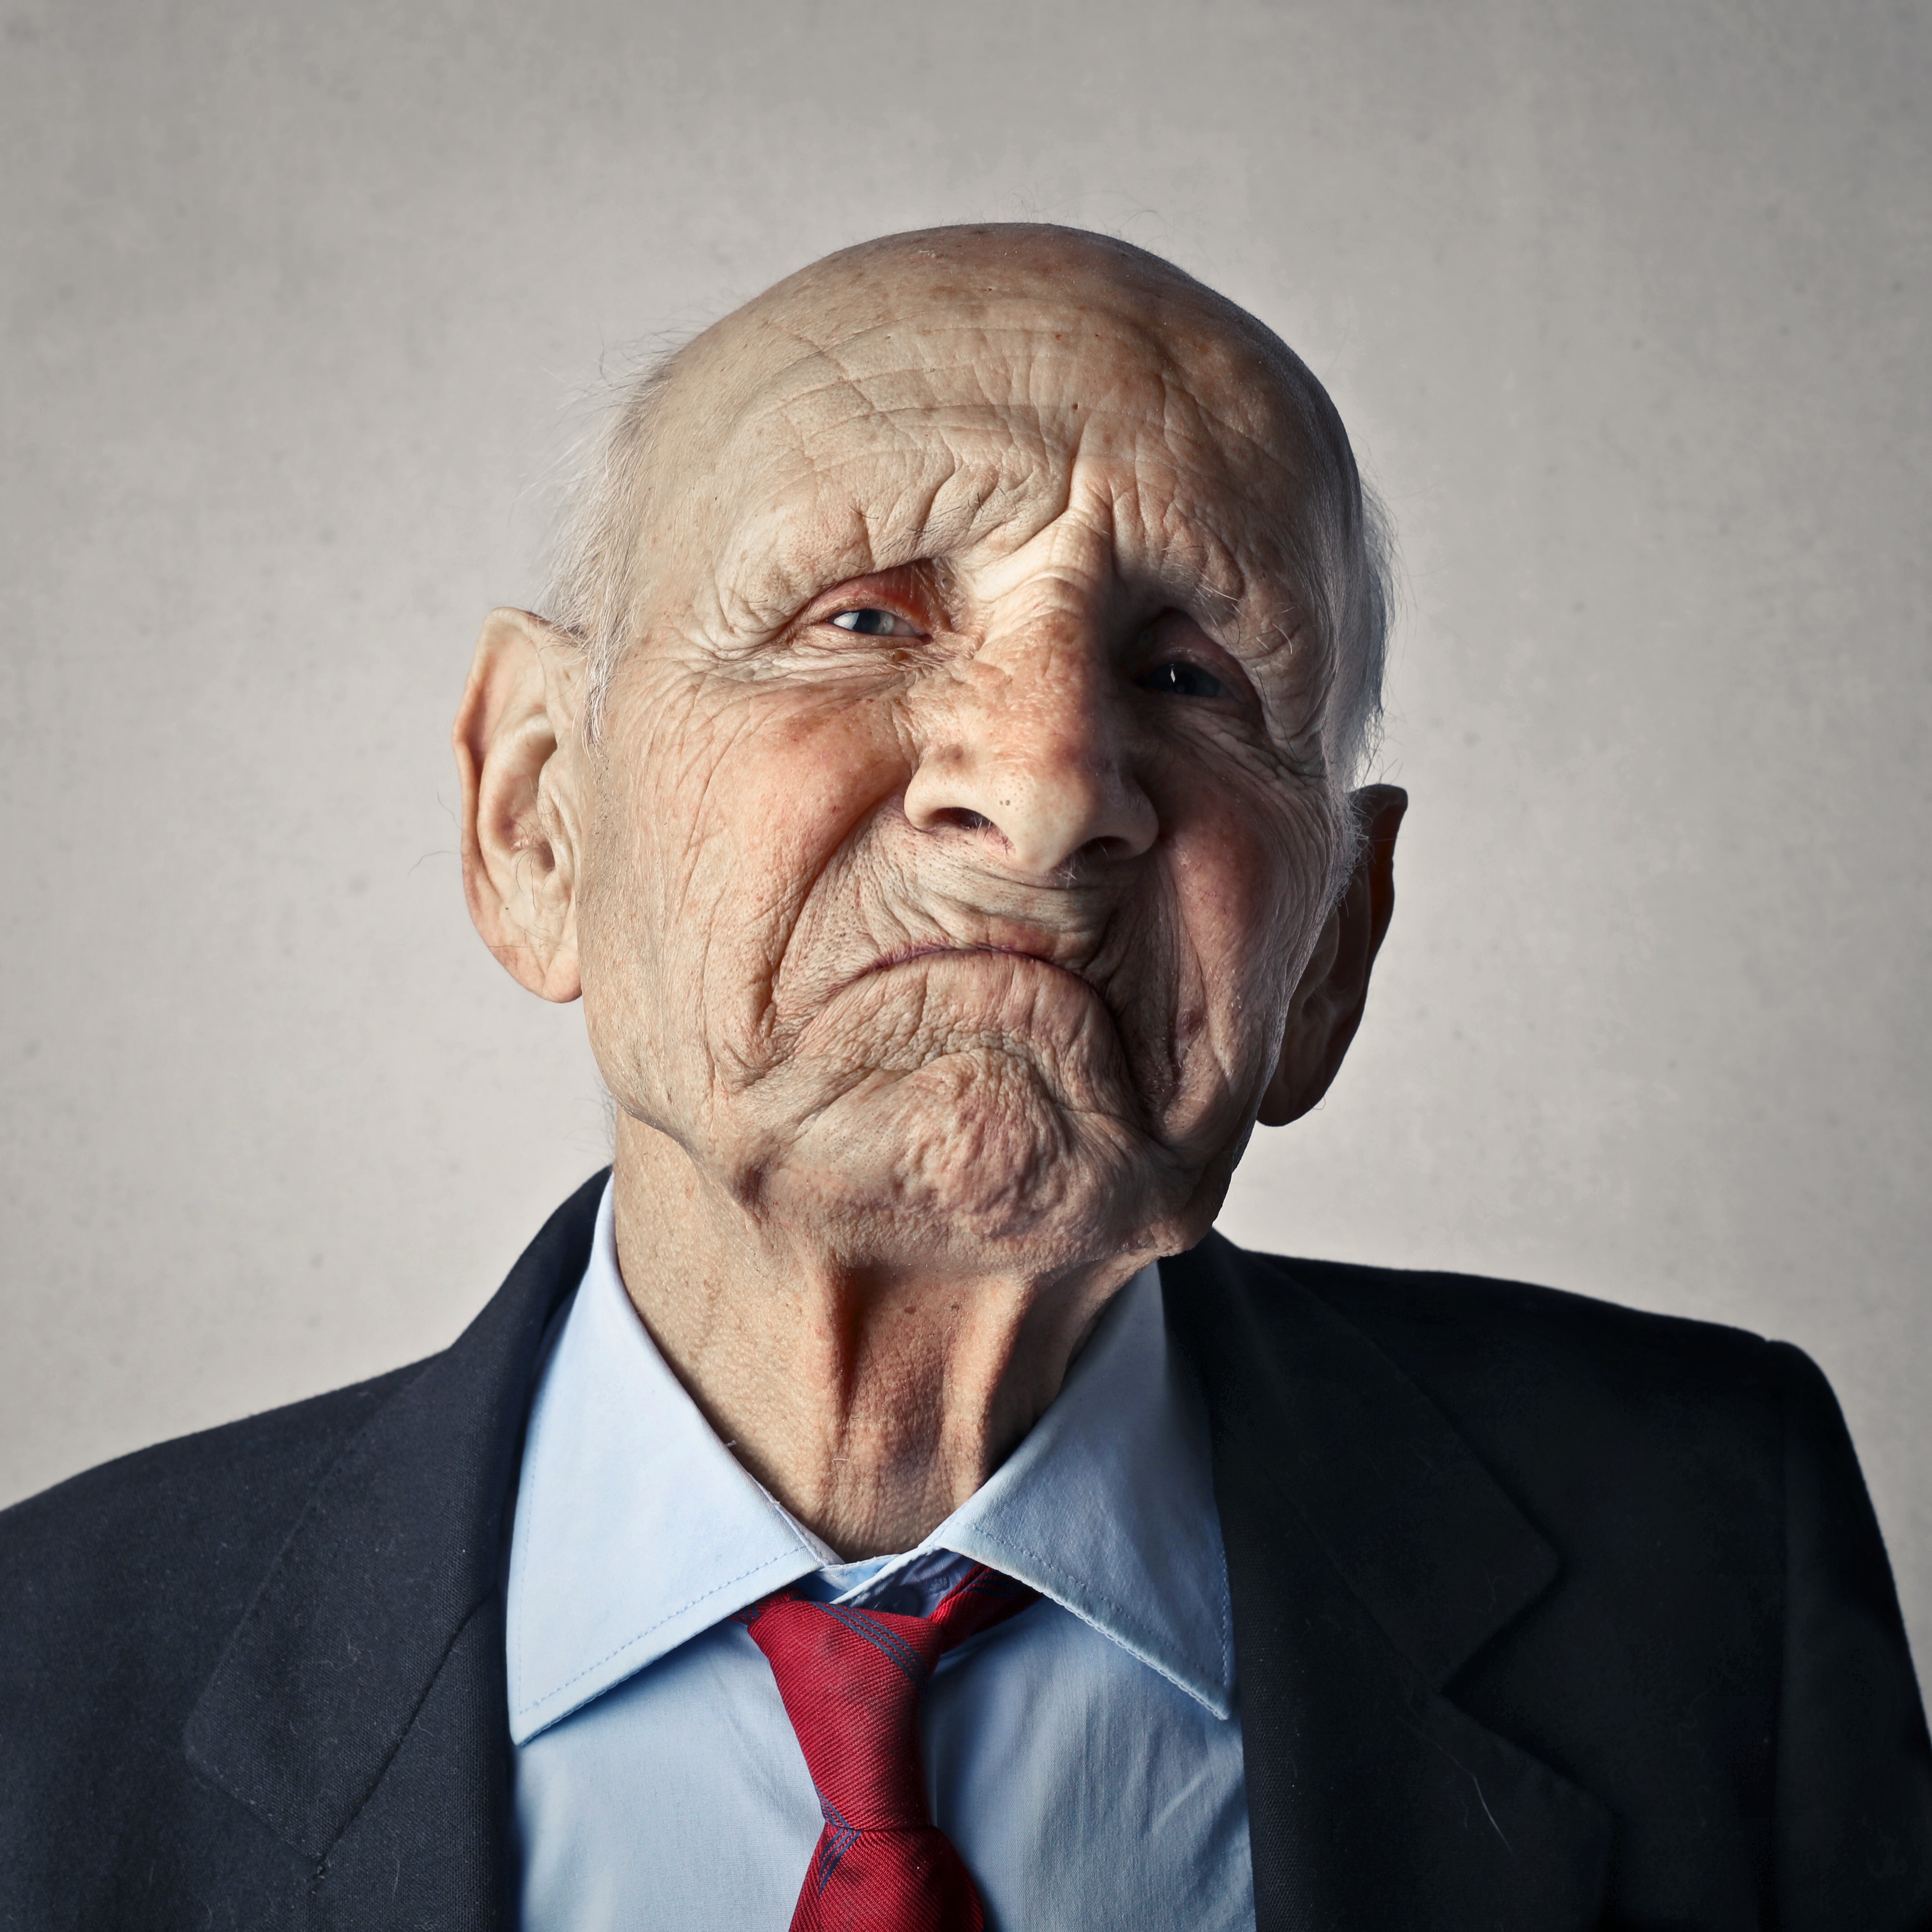 Elderly man in a suit frowning at the camera